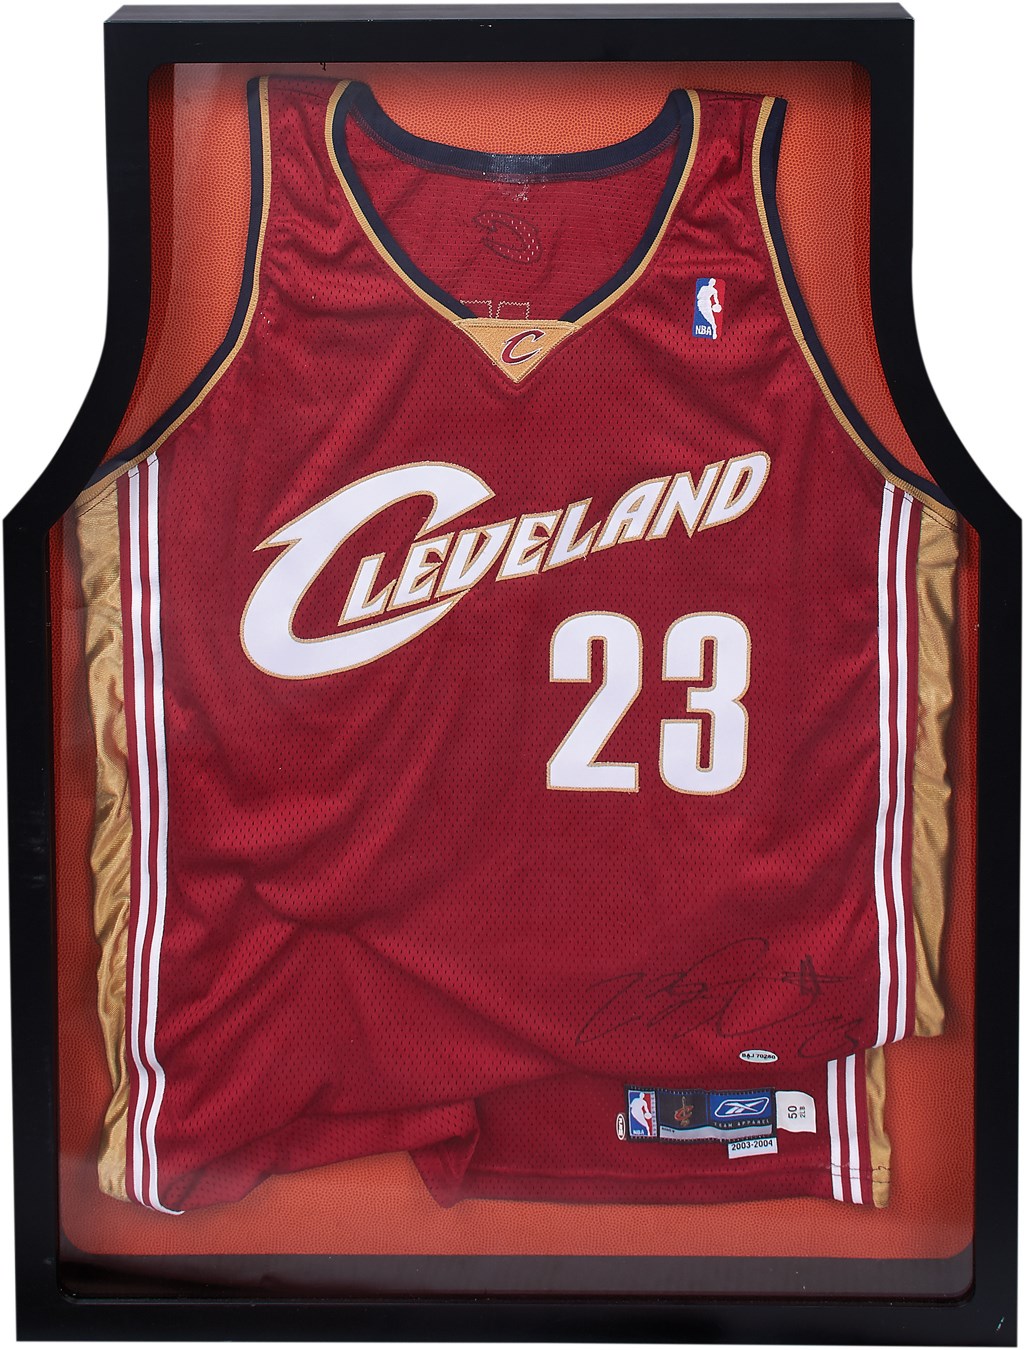 2003-04 LeBron James Signed Game Issued Rookie Jersey (UDA)